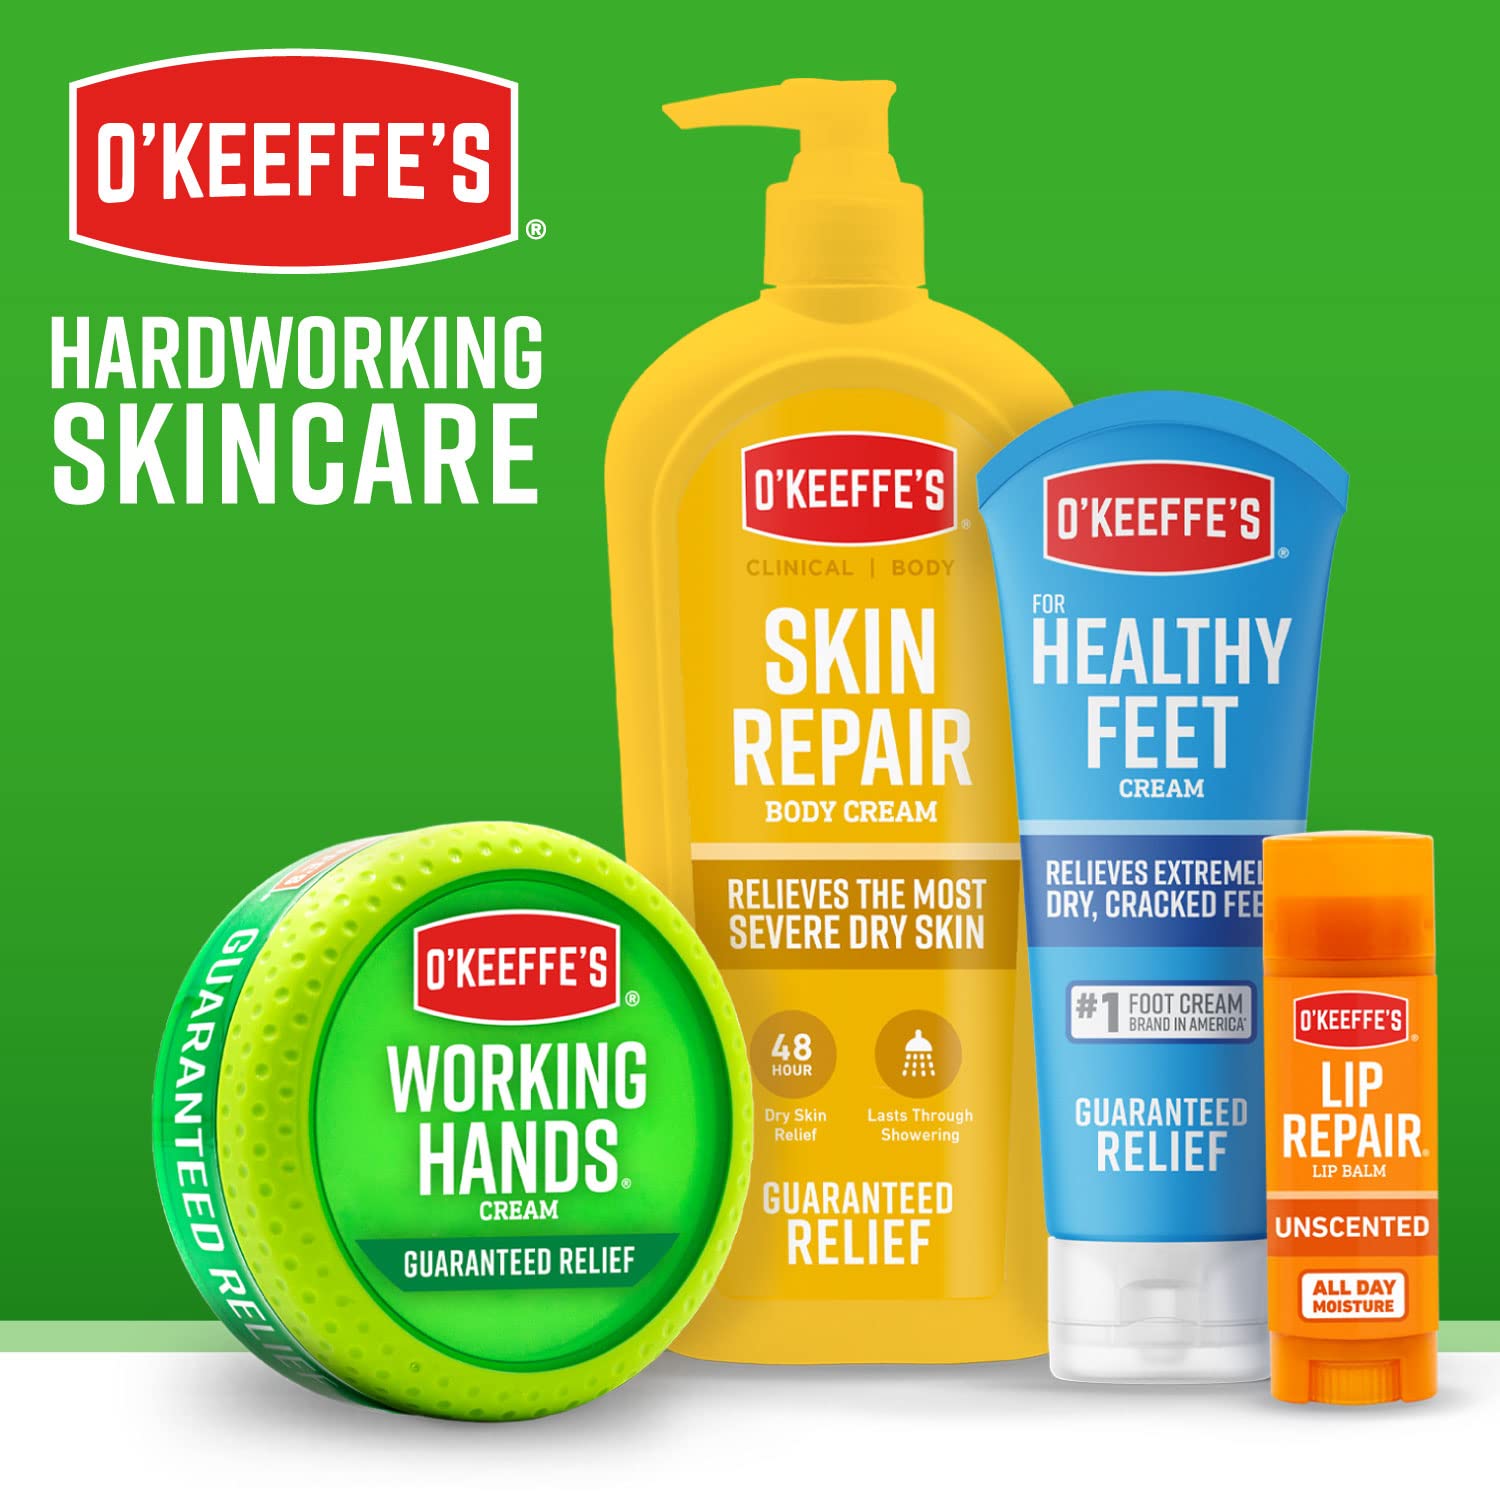 O'Keeffe's for Healthy Feet Night Treatment Foot Cream, Guaranteed Relief for Extremely Dry, Cracked Feet, Visible Results in 1 Night, 3.0 Ounce Tube, (Pack of 2)